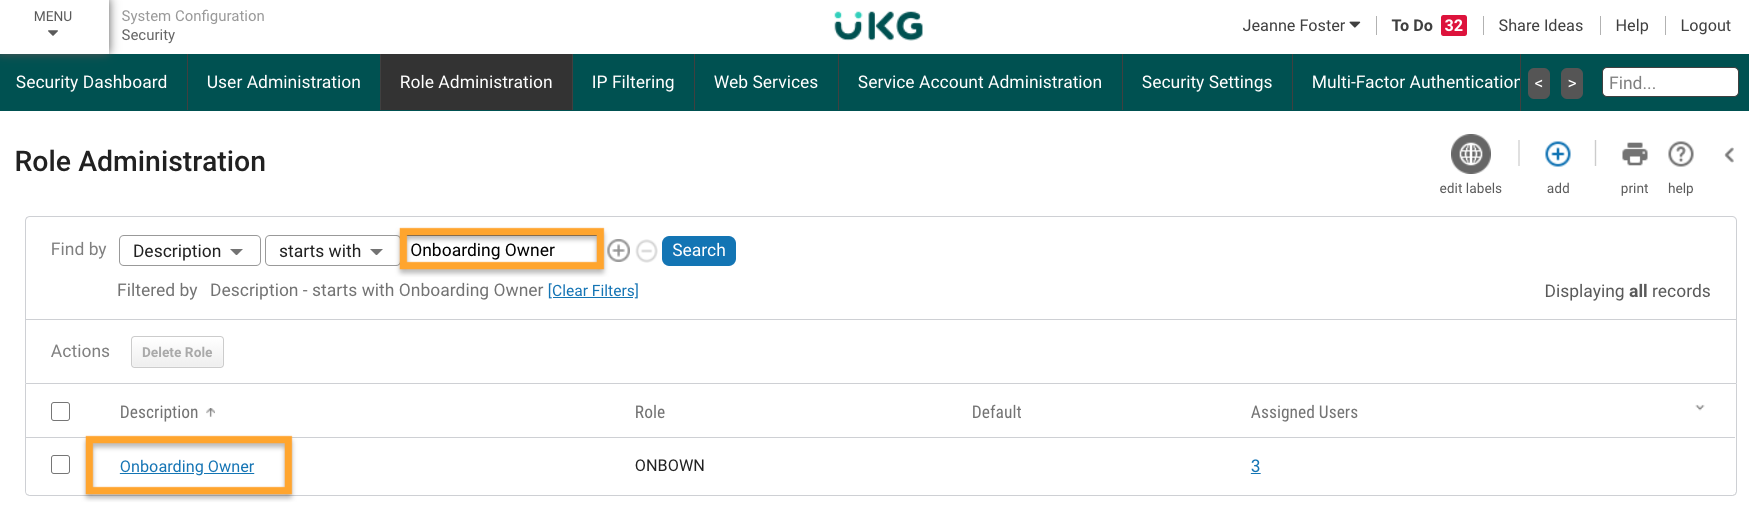 UKG Pro Onboarding shows an example URl highlighted